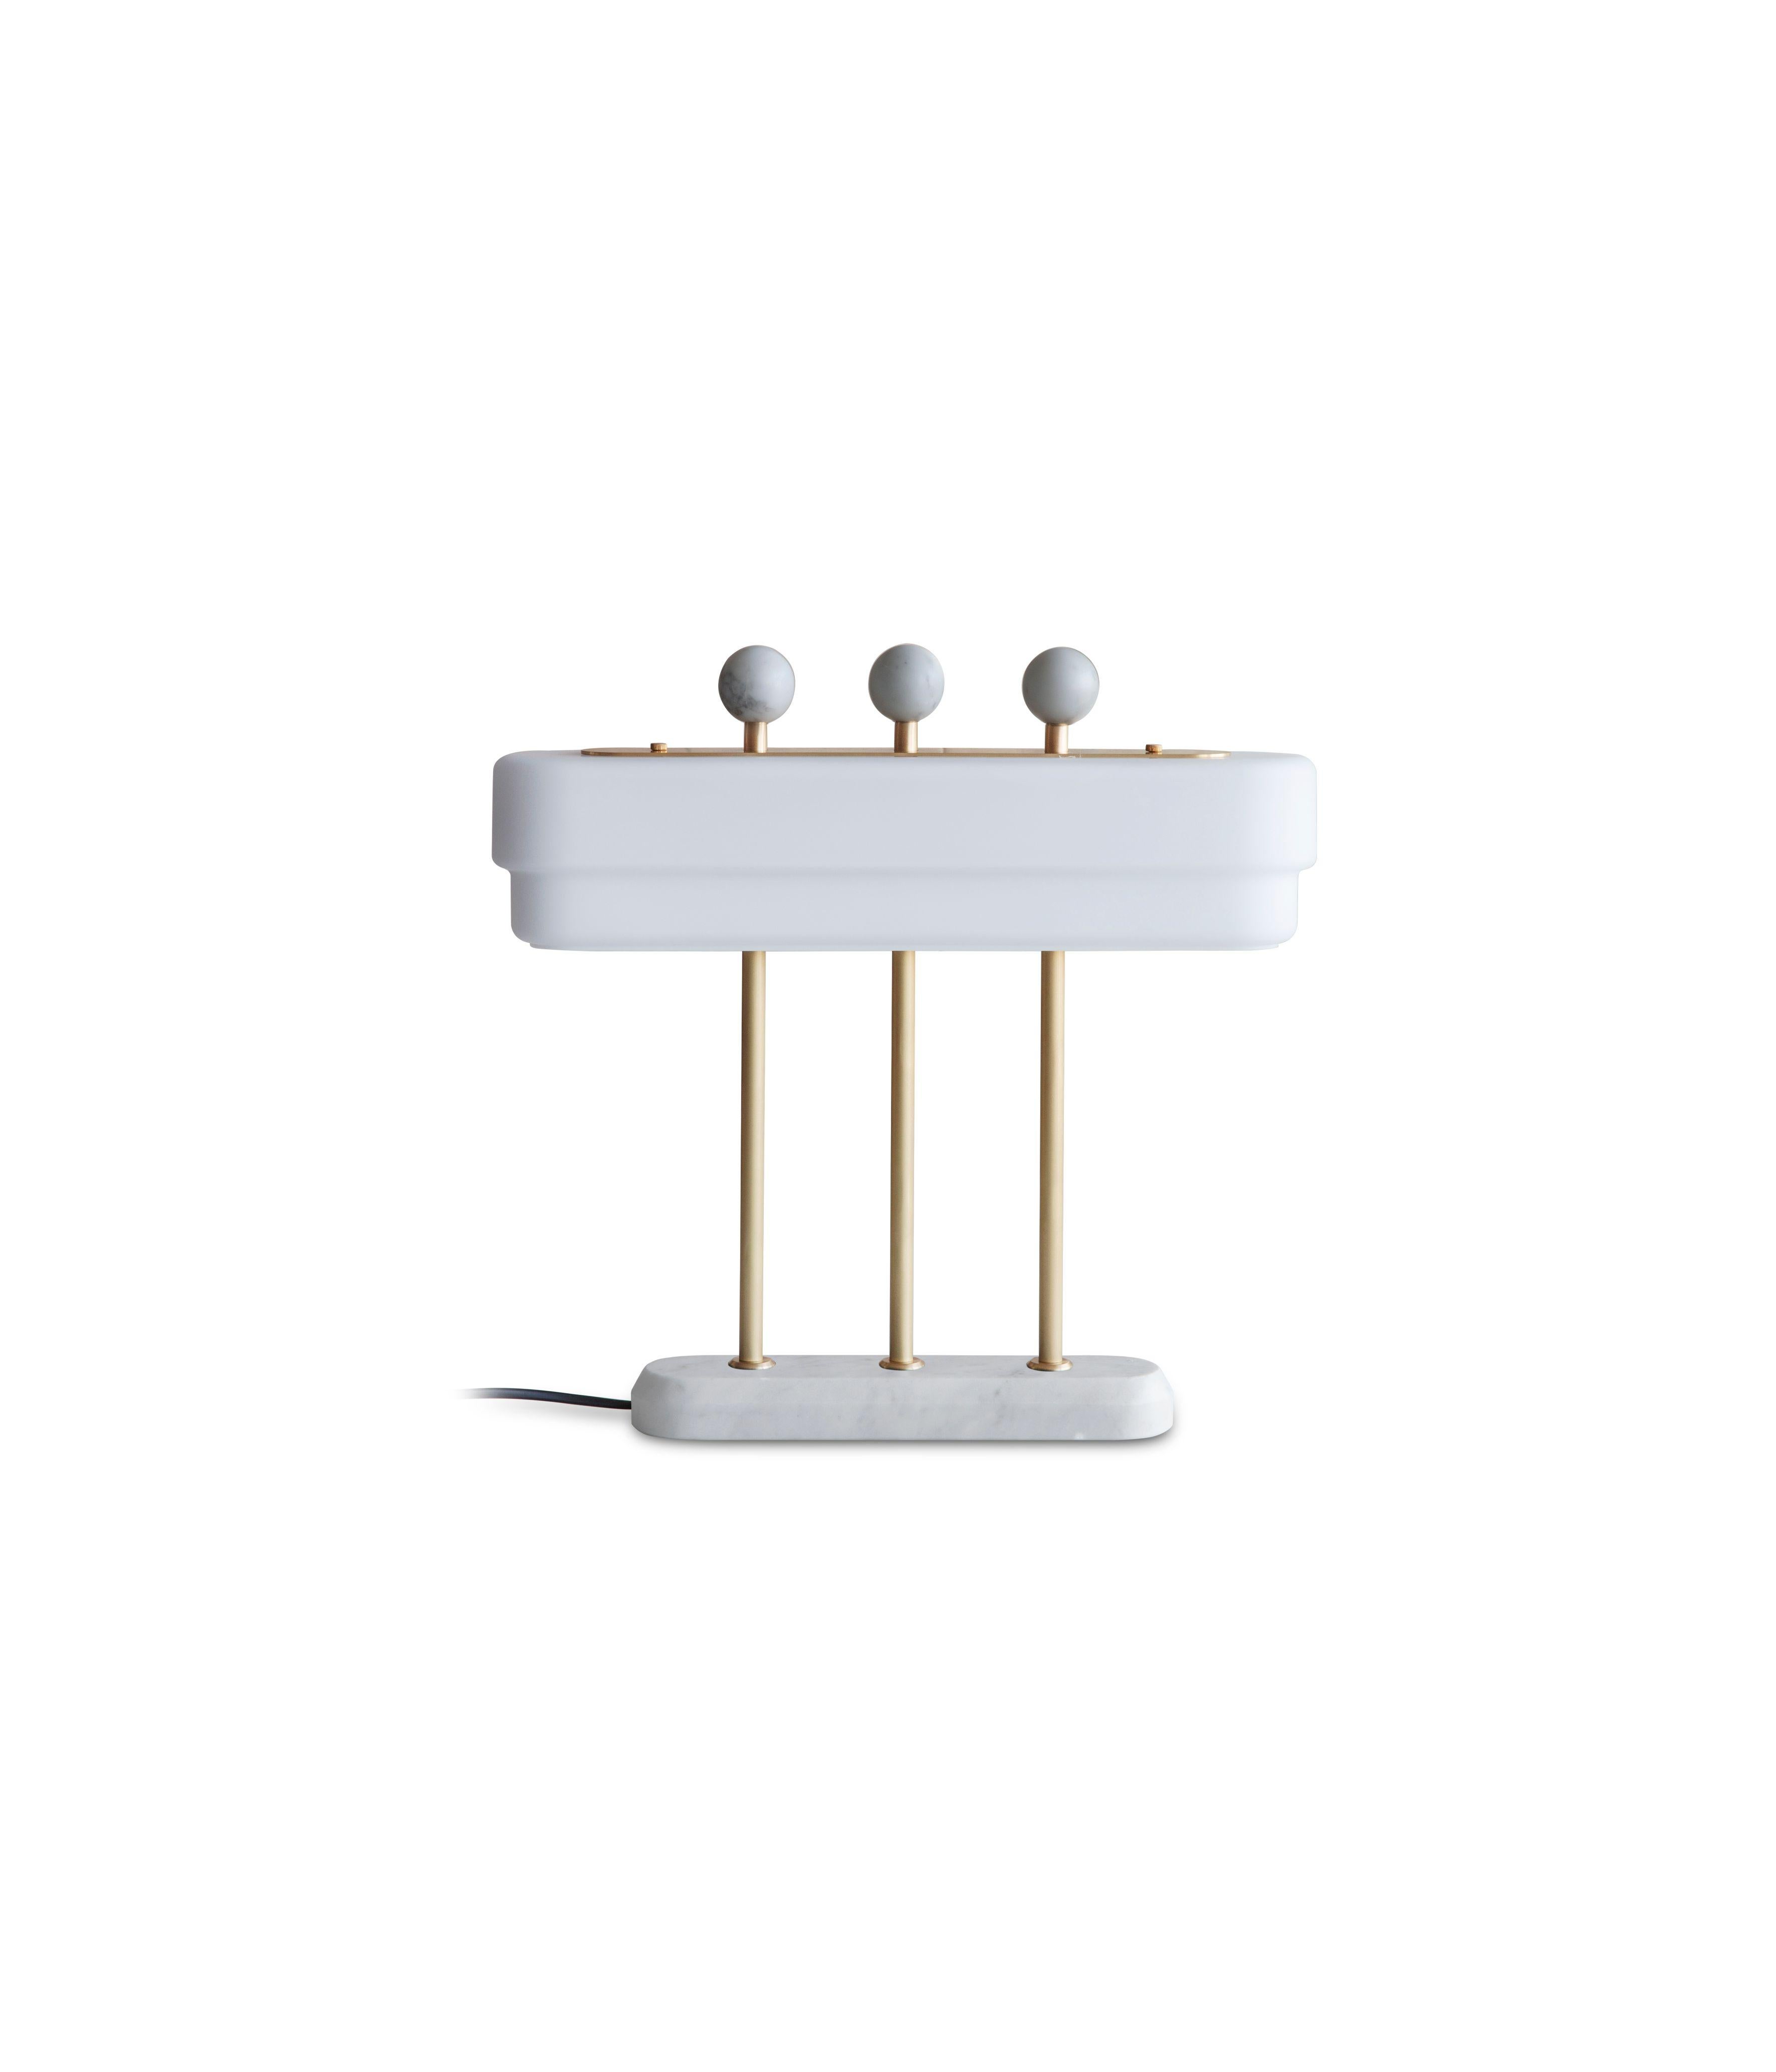 White spate table lamp by Bert Frank.
Dimensions: H 40 x W 9 x D 44 cm.
Materials: brass, marble and glass.


All our lamps can be wired according to each country. If sold to the USA it will be wired for the USA for instance.

When Adam Yeats